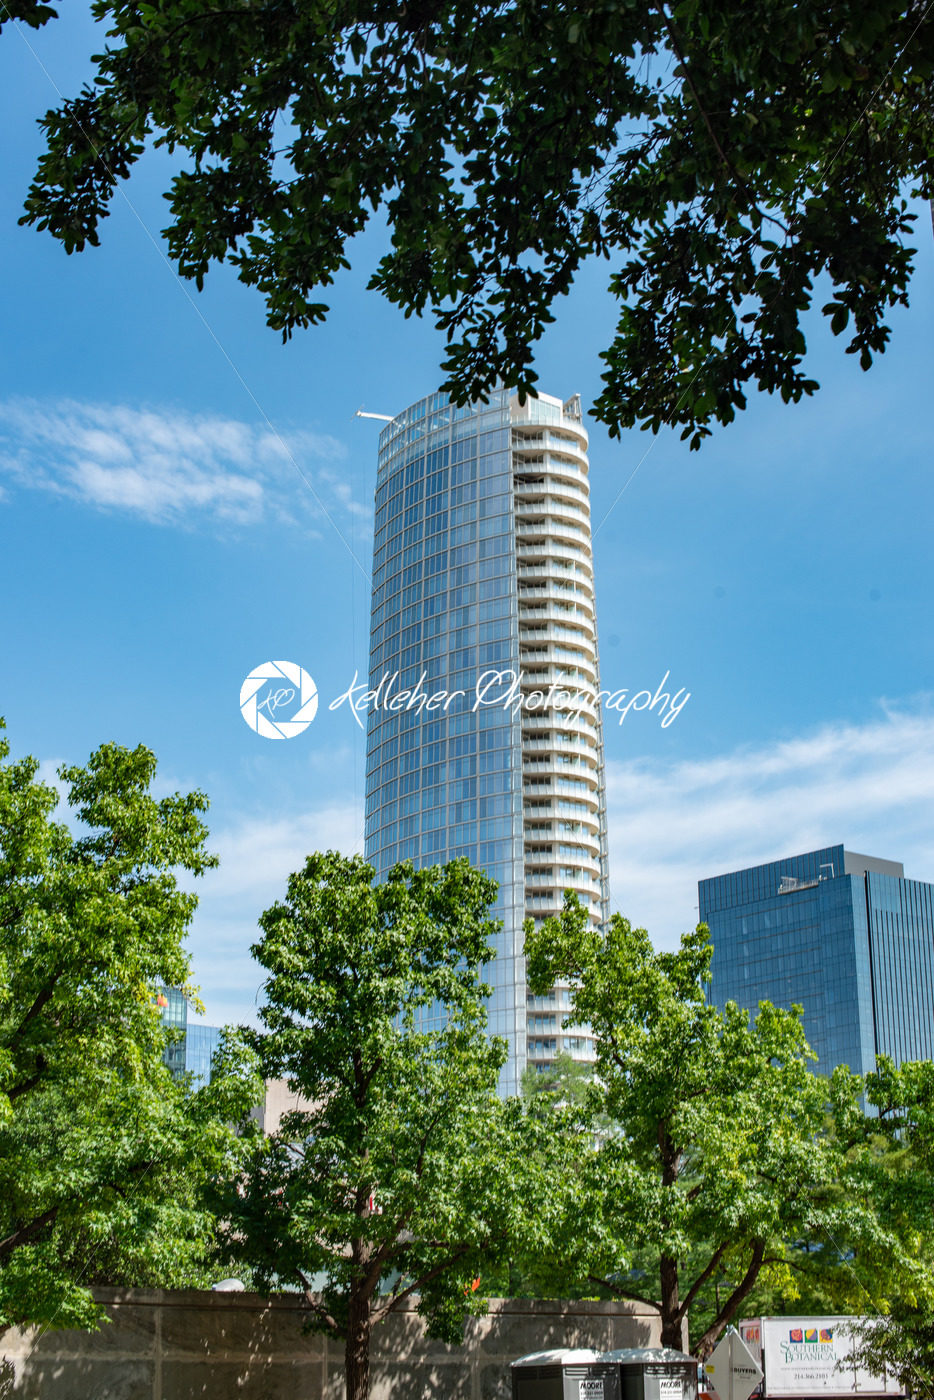 Dallas, Texas – May 7, 2018: The Museum Tower in Dallas, Texas against blue sky - Kelleher Photography Store